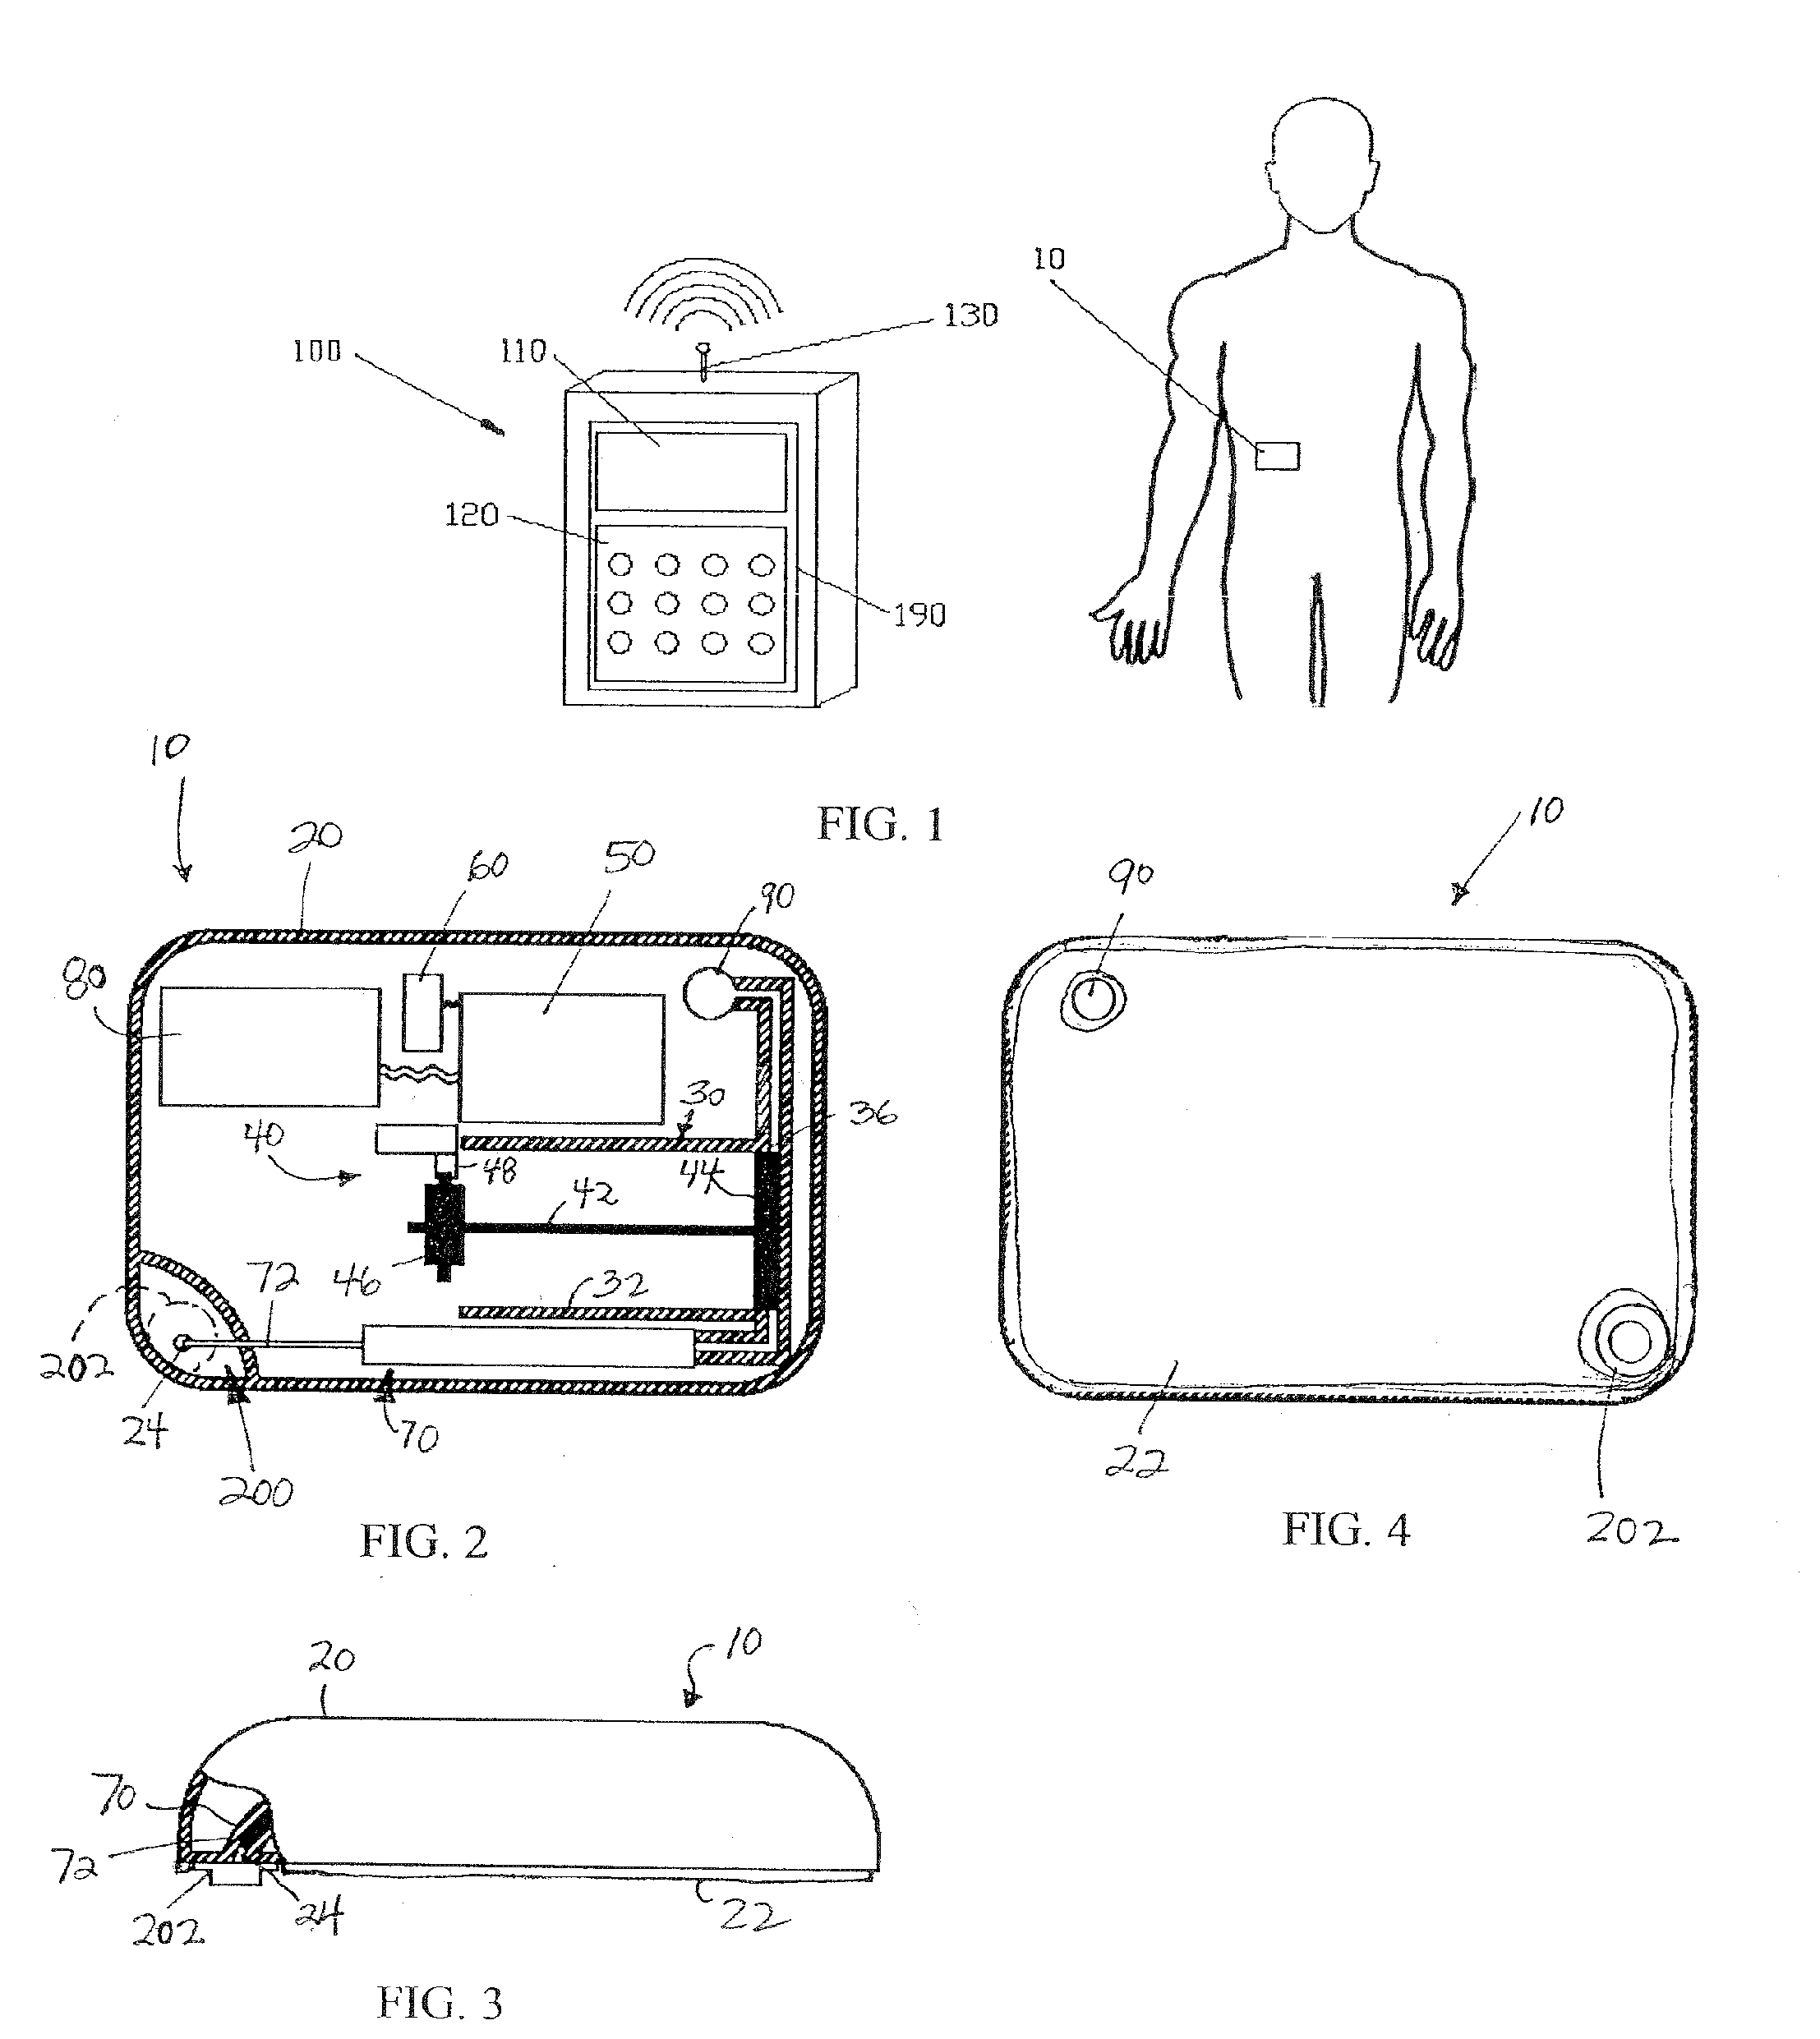 Flow restriction system and method for patient infusion device